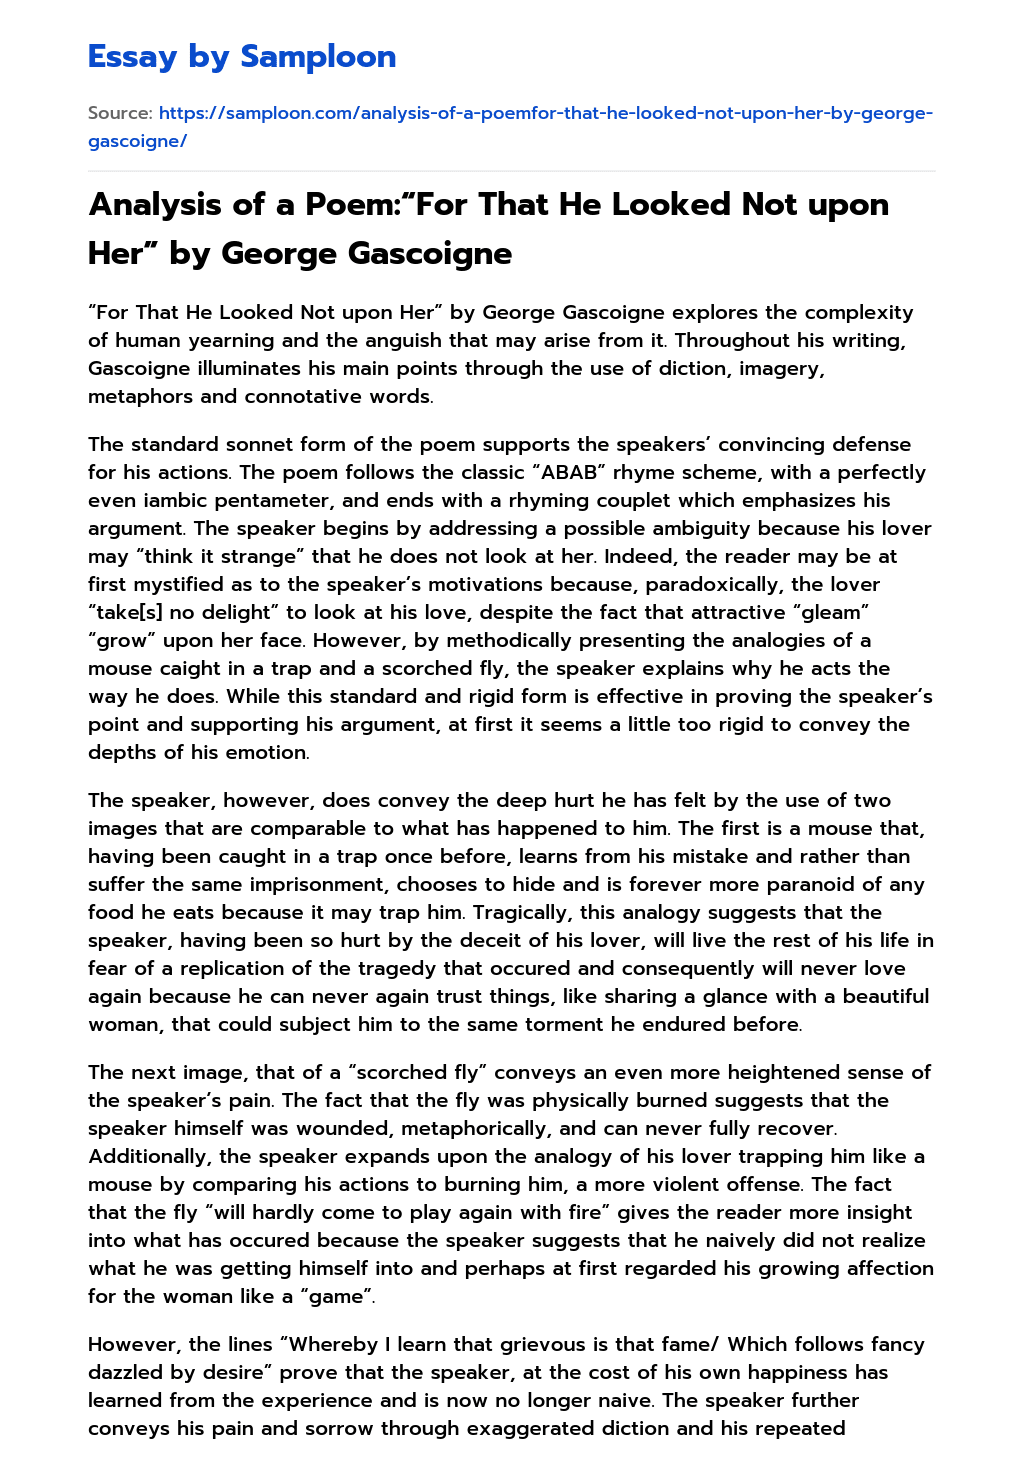 Analysis of a Poem:“For That He Looked Not upon Her” by George Gascoigne  essay